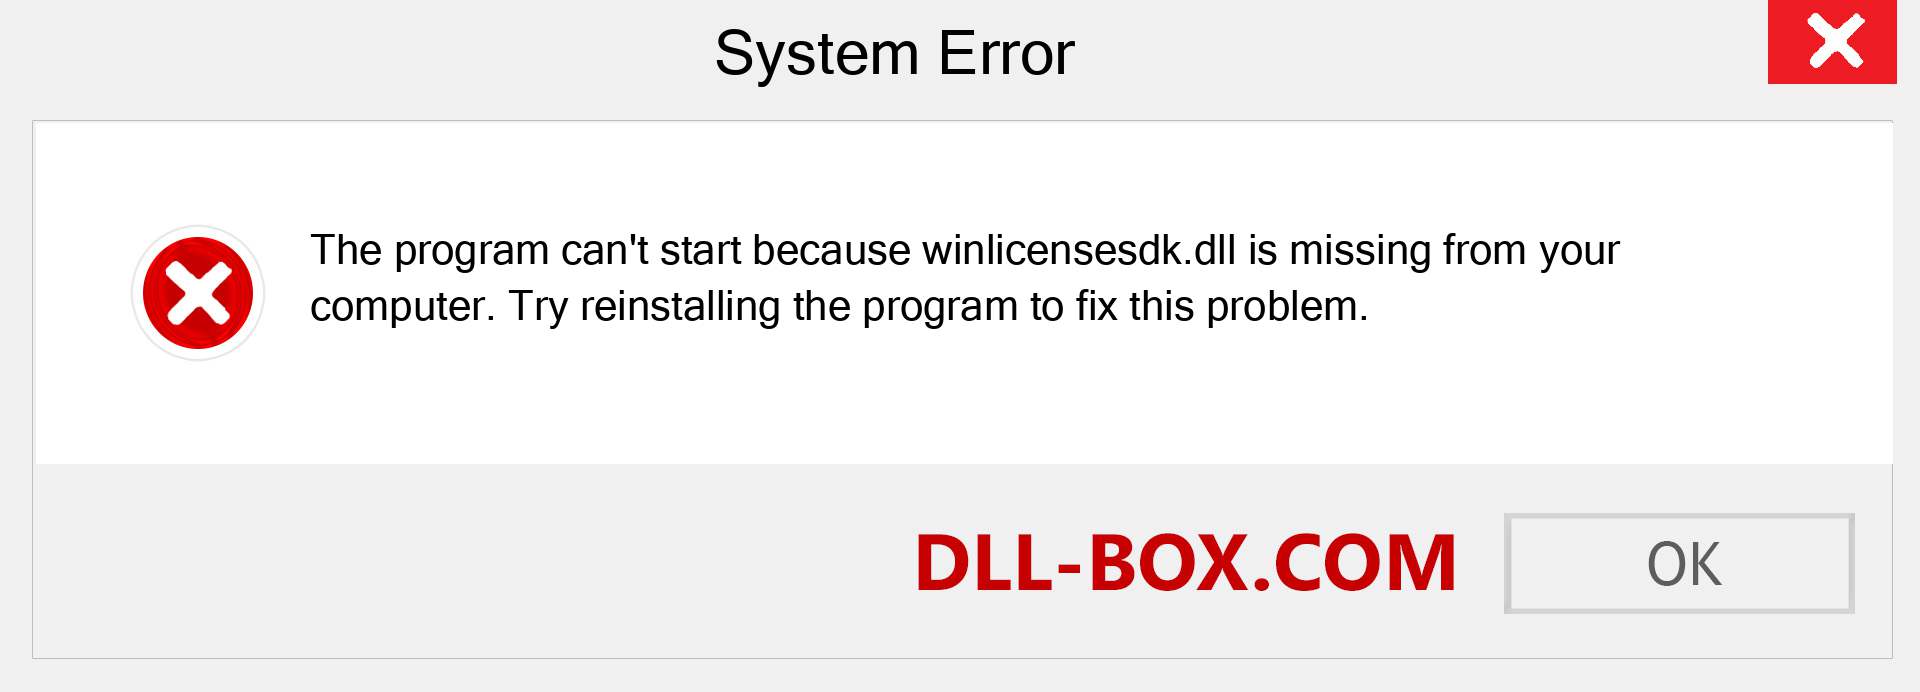  winlicensesdk.dll file is missing?. Download for Windows 7, 8, 10 - Fix  winlicensesdk dll Missing Error on Windows, photos, images